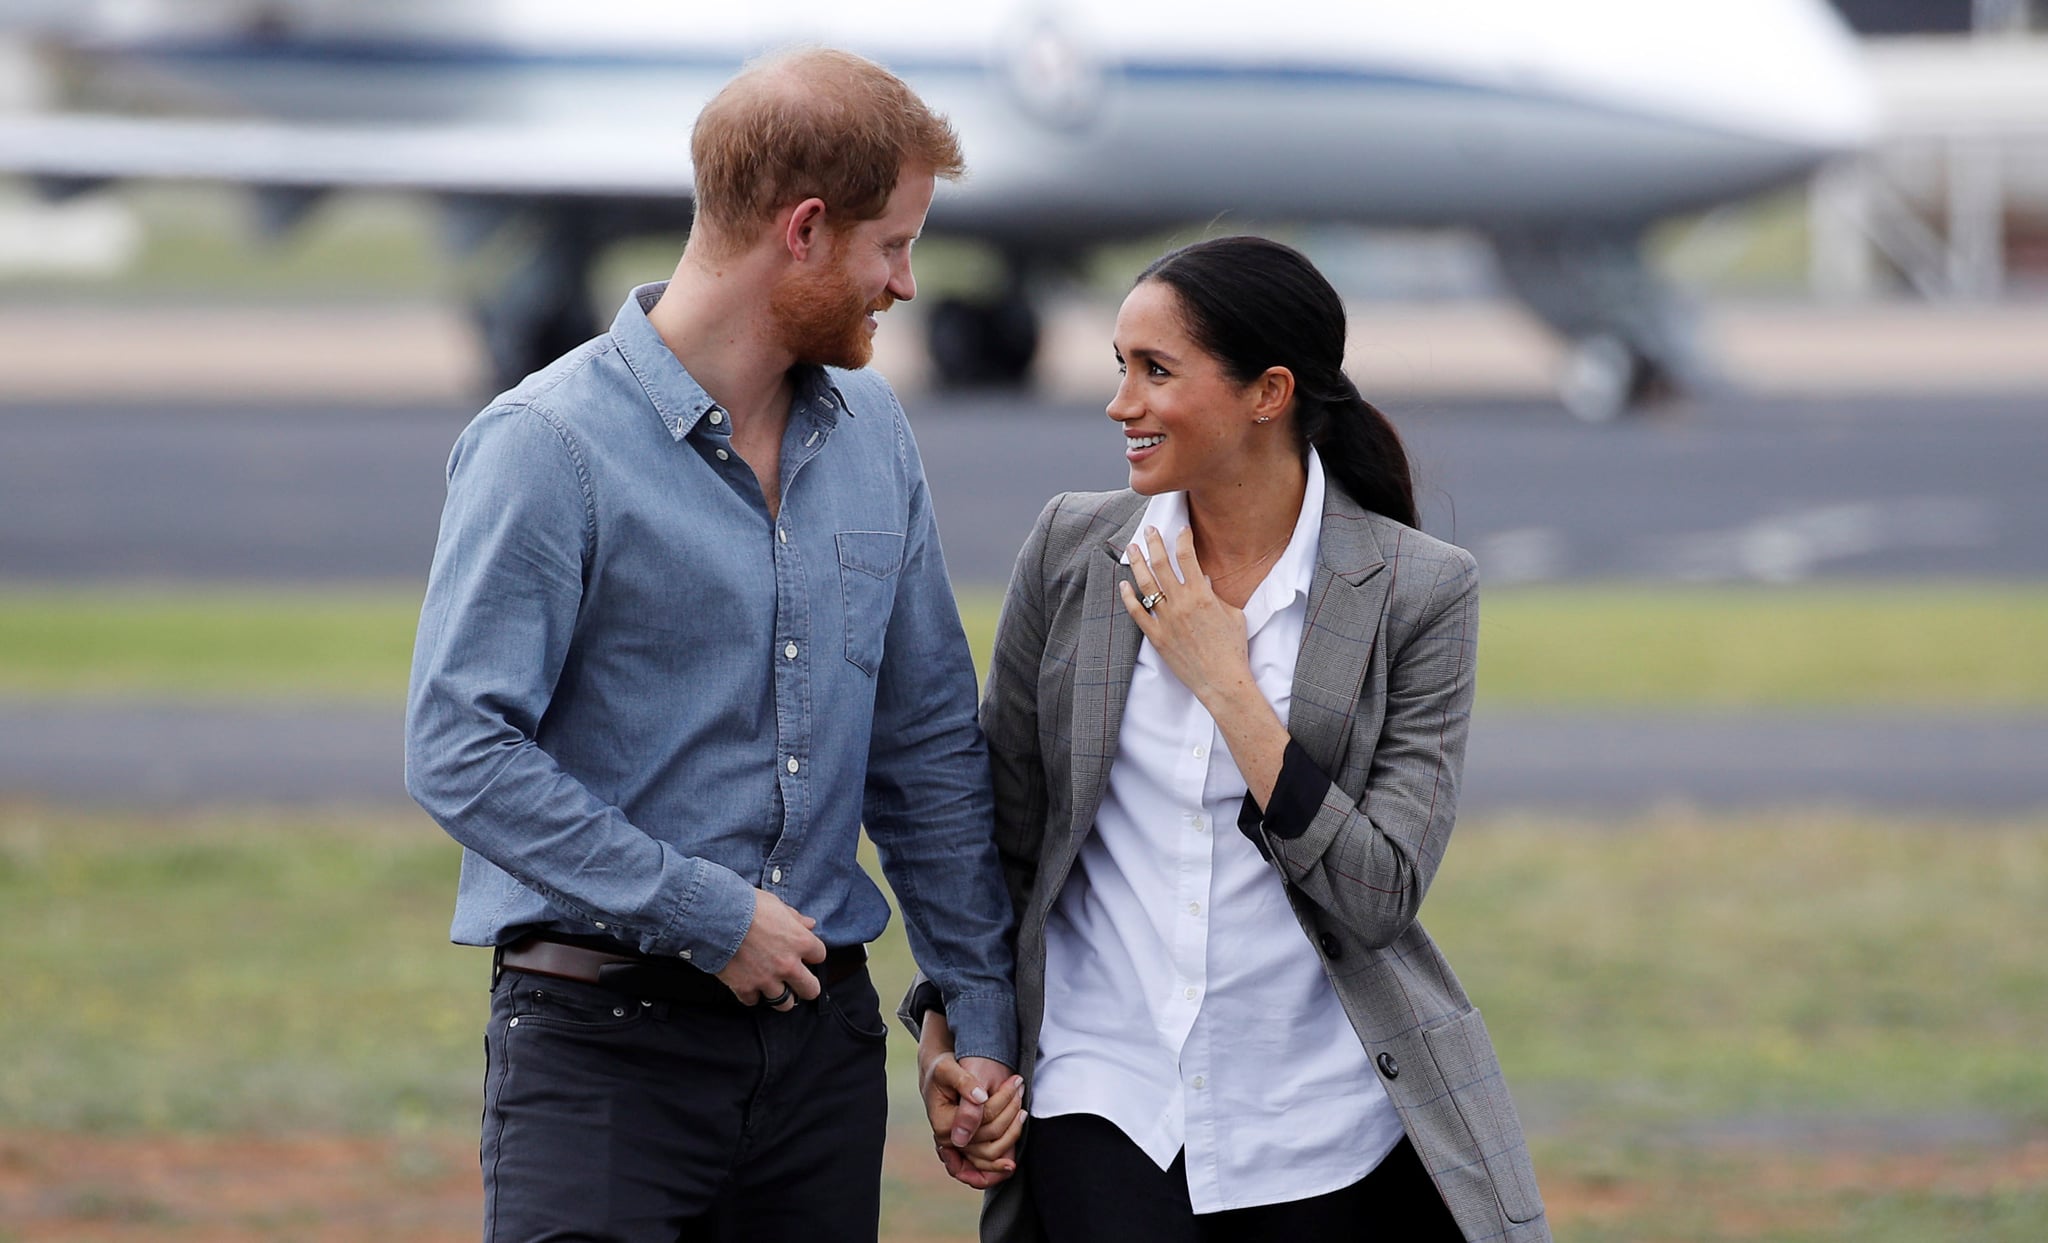 DUBBO, AUSTRALIA - OCTOBER 17:  Prince Harry, Duke of Sussex and Meghan, Duchess of Sussex arrive at Dubbo Airport on October 17, 2018 in Dubbo, Australia. The Duke and Duchess of Sussex are on their official 16-day Autumn tour visiting cities in Australia, Fiji, Tonga and New Zealand.  (Photo by Phil Noble - Pool/Getty Images)